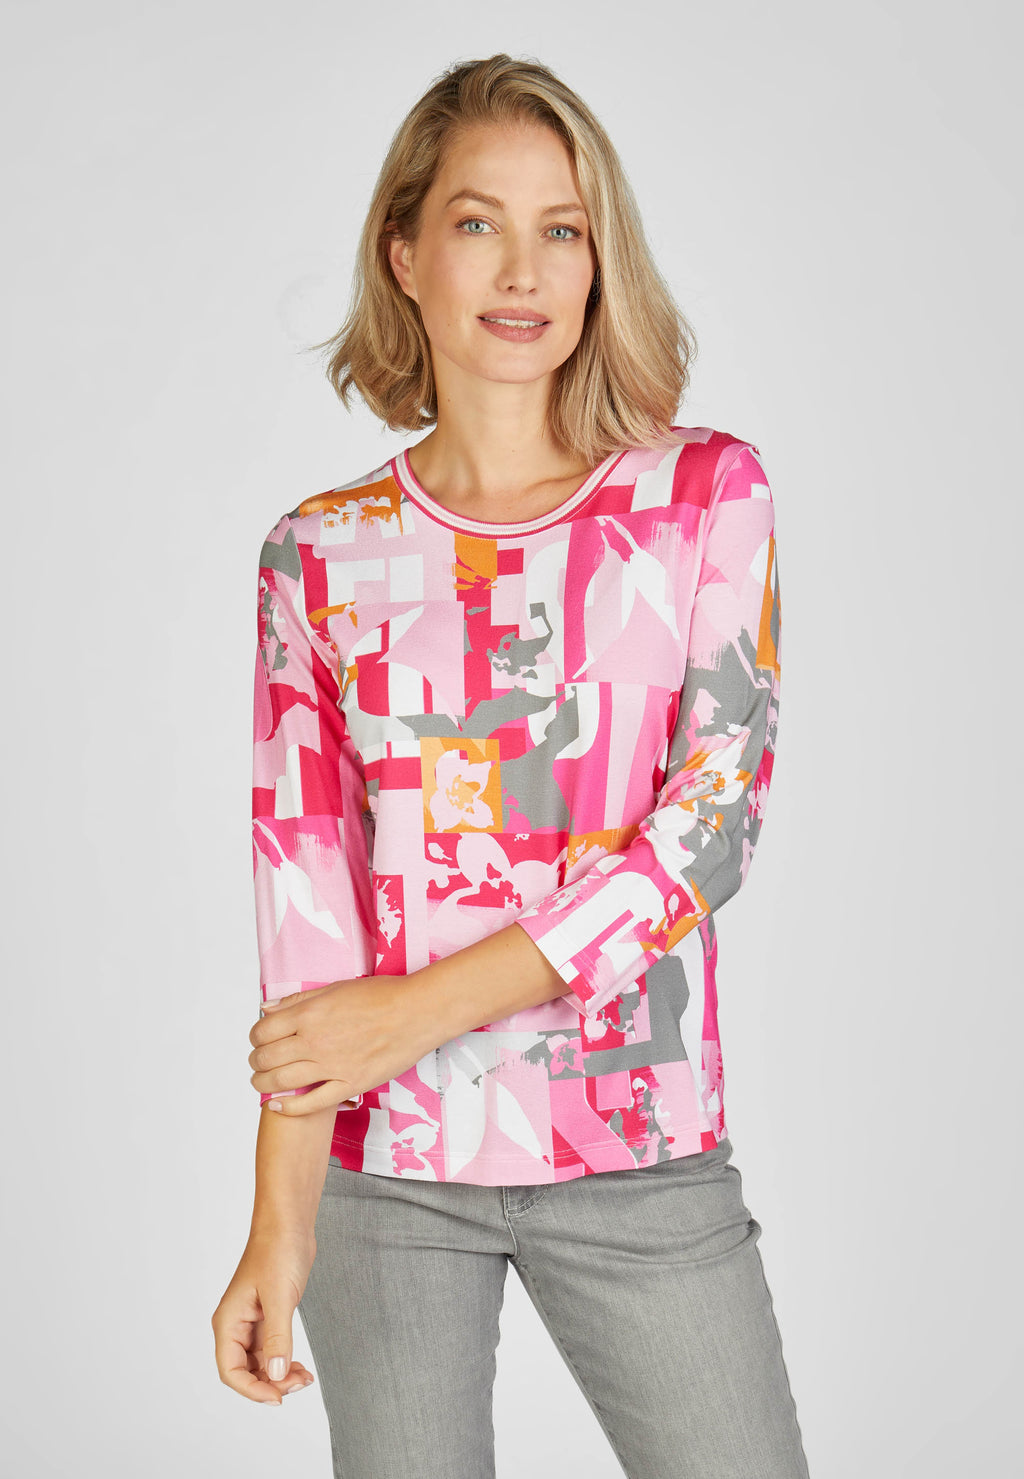 Rabe magnolia park collection printed blouse in pink, product code 52-113350